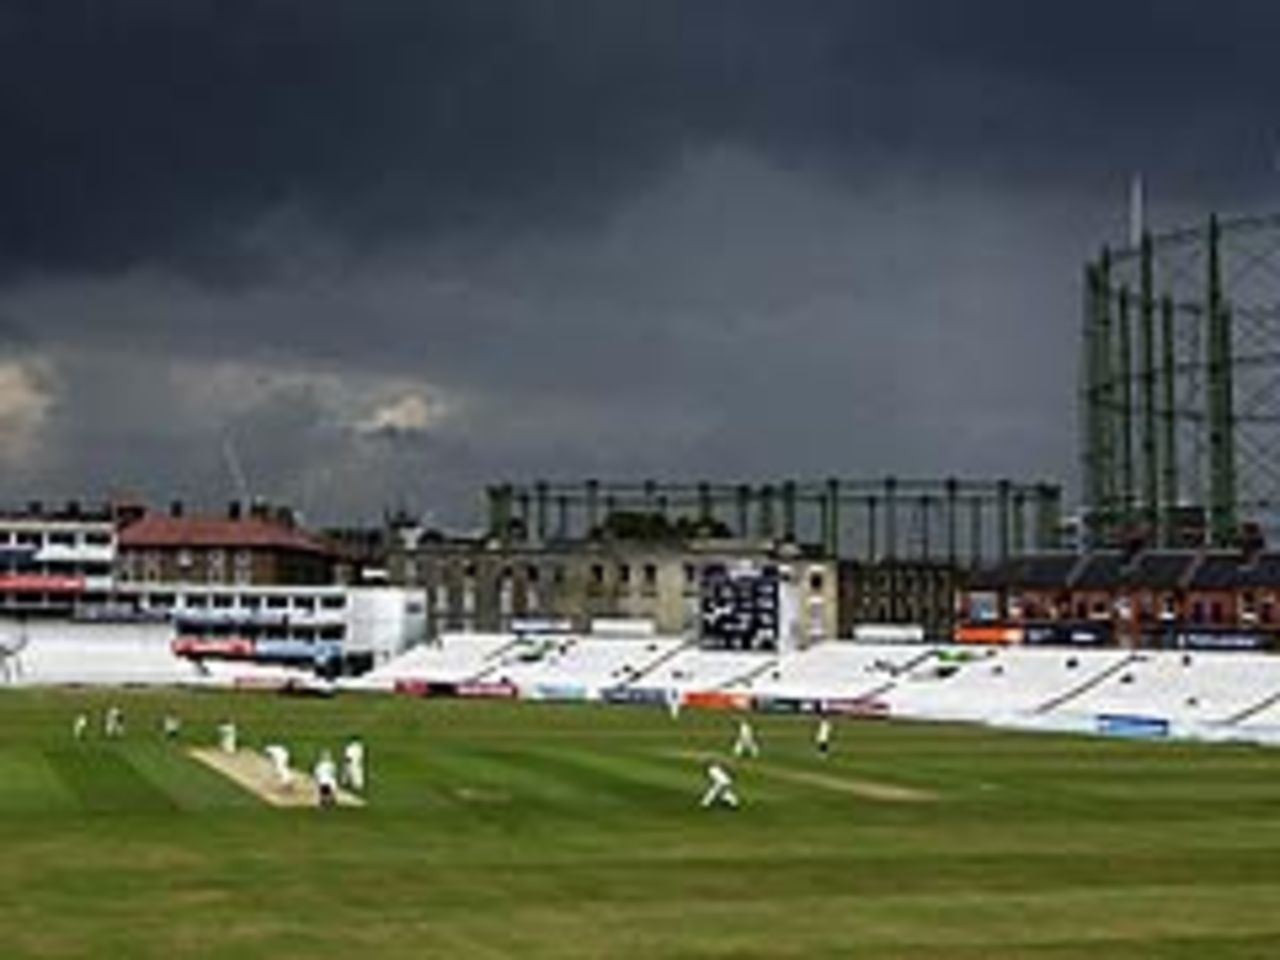 Storm clouds gather over The Oval during Surrey's match with Kent, July 2, 2003